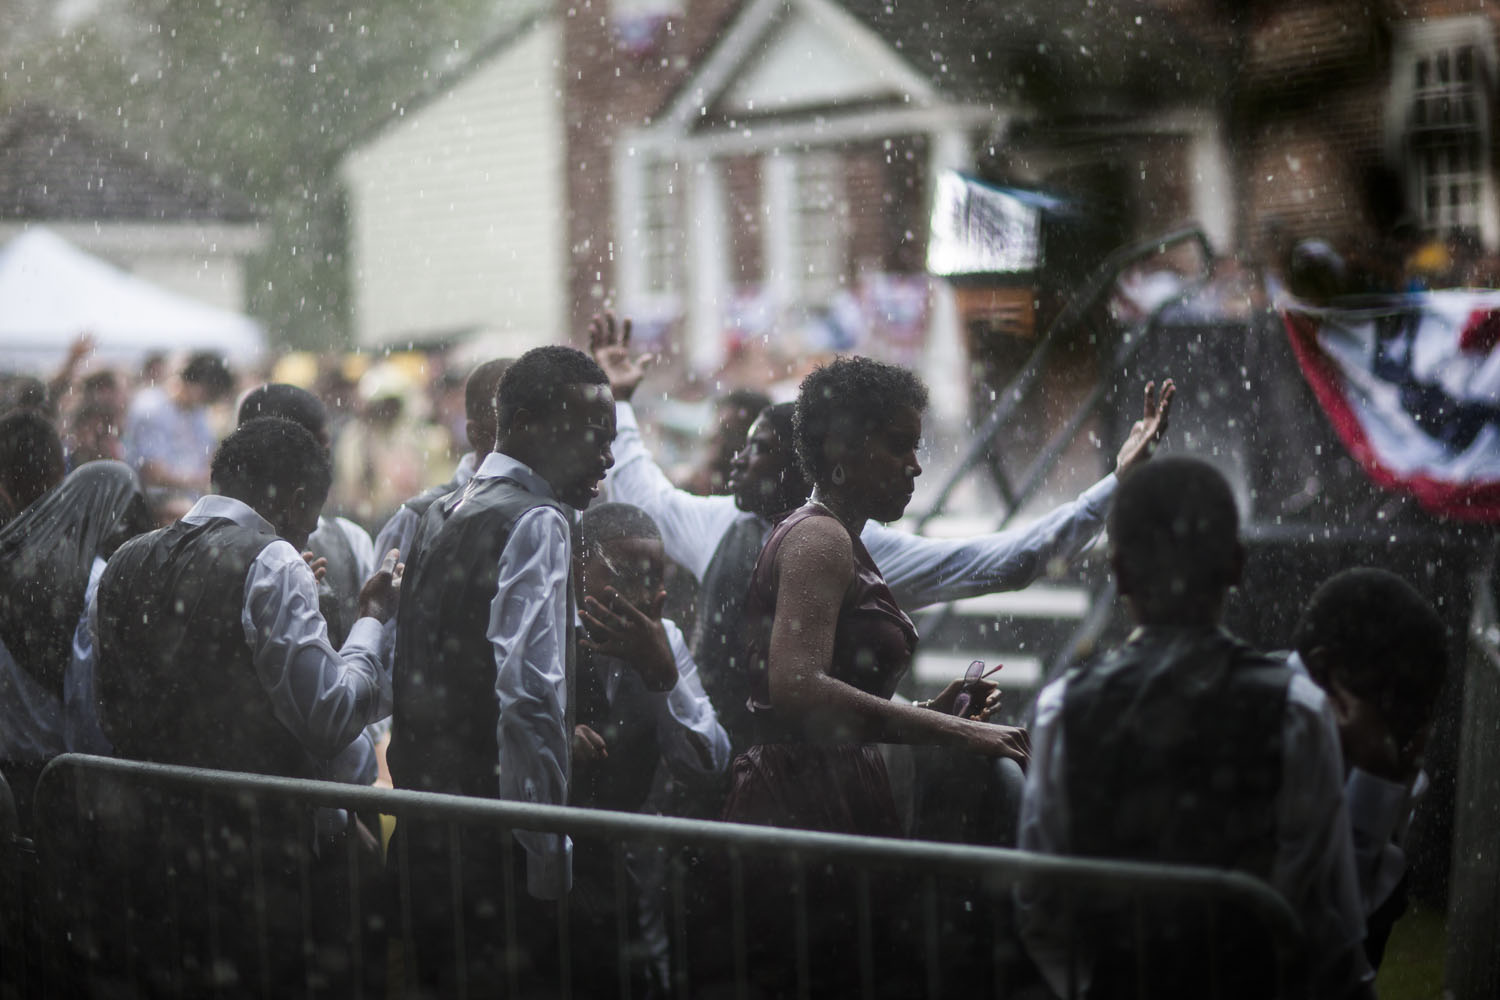 Image: A high school choir gets soaked in a downpour before a campaign rally for President Obama in Glen Allen, Va. July 14, 2012.